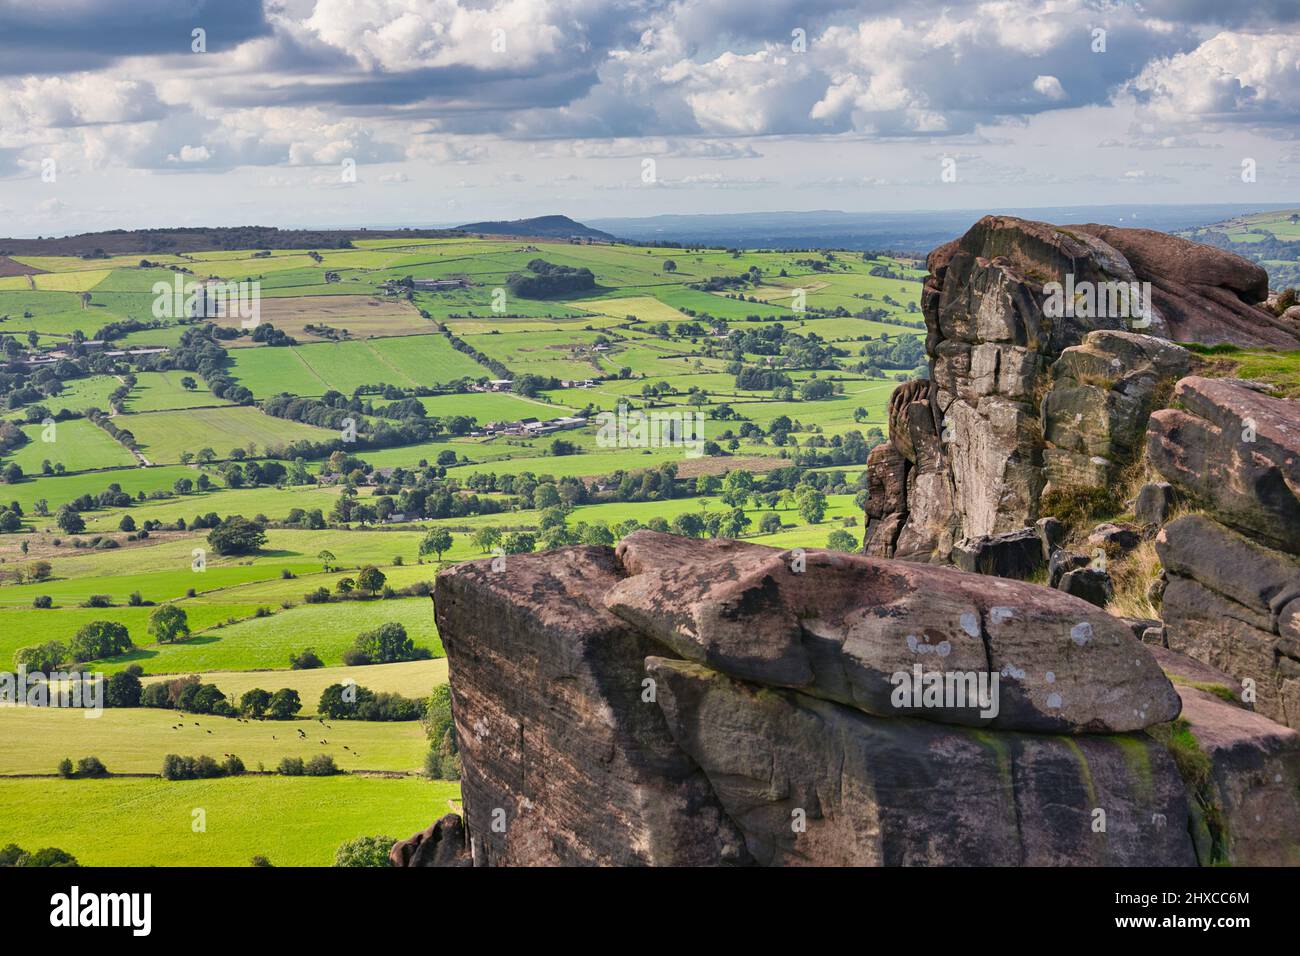 View vista panorama from The Roaches gritstone escarpment, Peak District National Park, Staffordshire, England Stock Photo